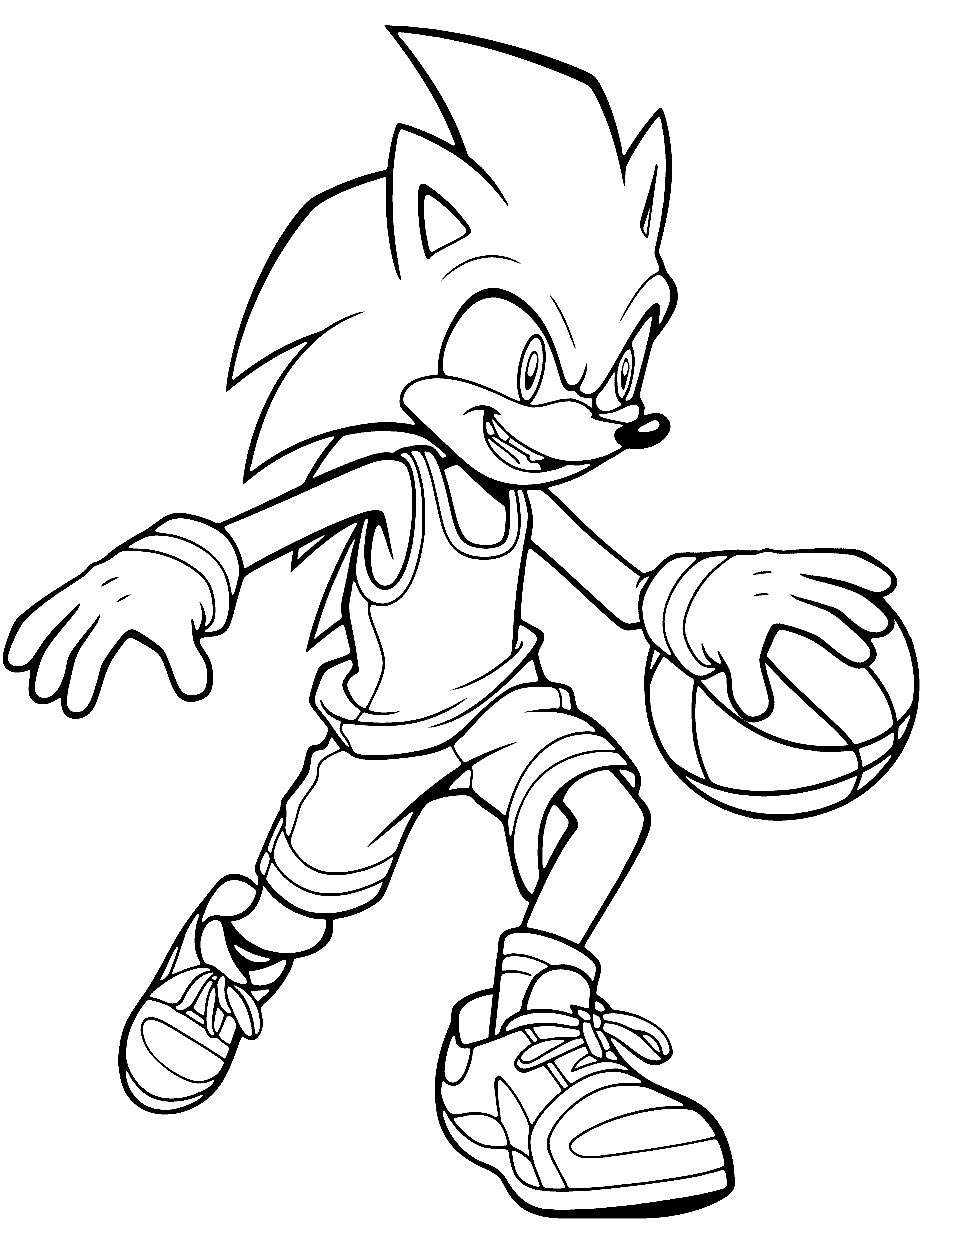 Sonic's Fast Break Basketball Coloring Page - Sonic the Hedgehog making a fast break down the court with a basketball.